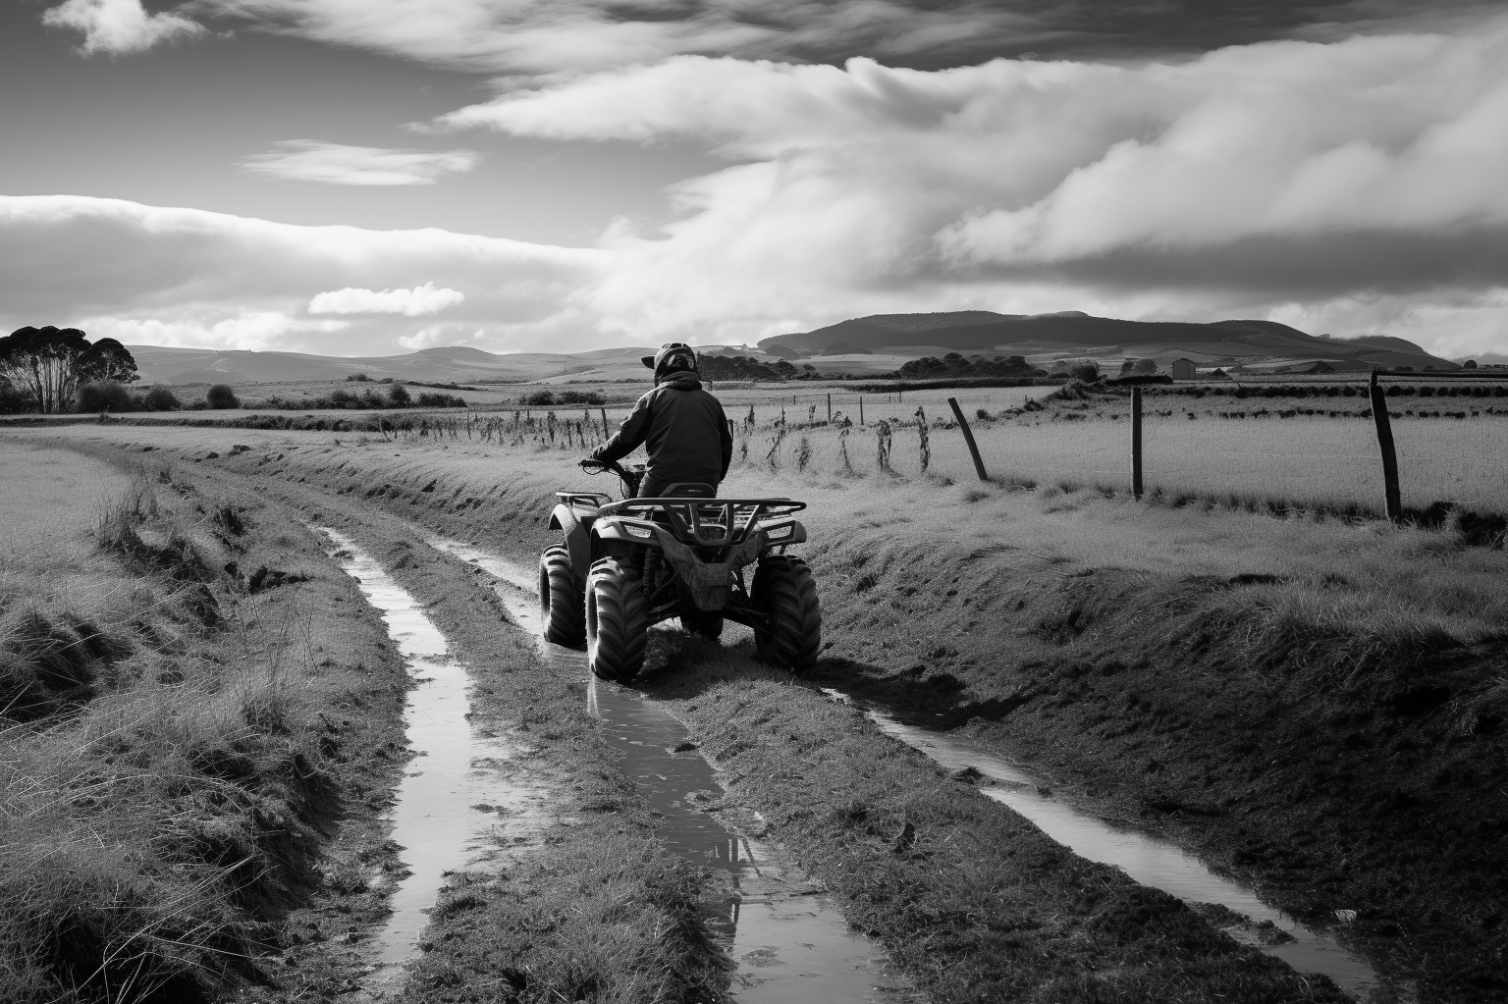 djunemployed_new_zealand_farmer_on_his_quad_bike_in_the_country_ce8425ec-05c4-4dc7-9647-c8d6fc8e8d40.png